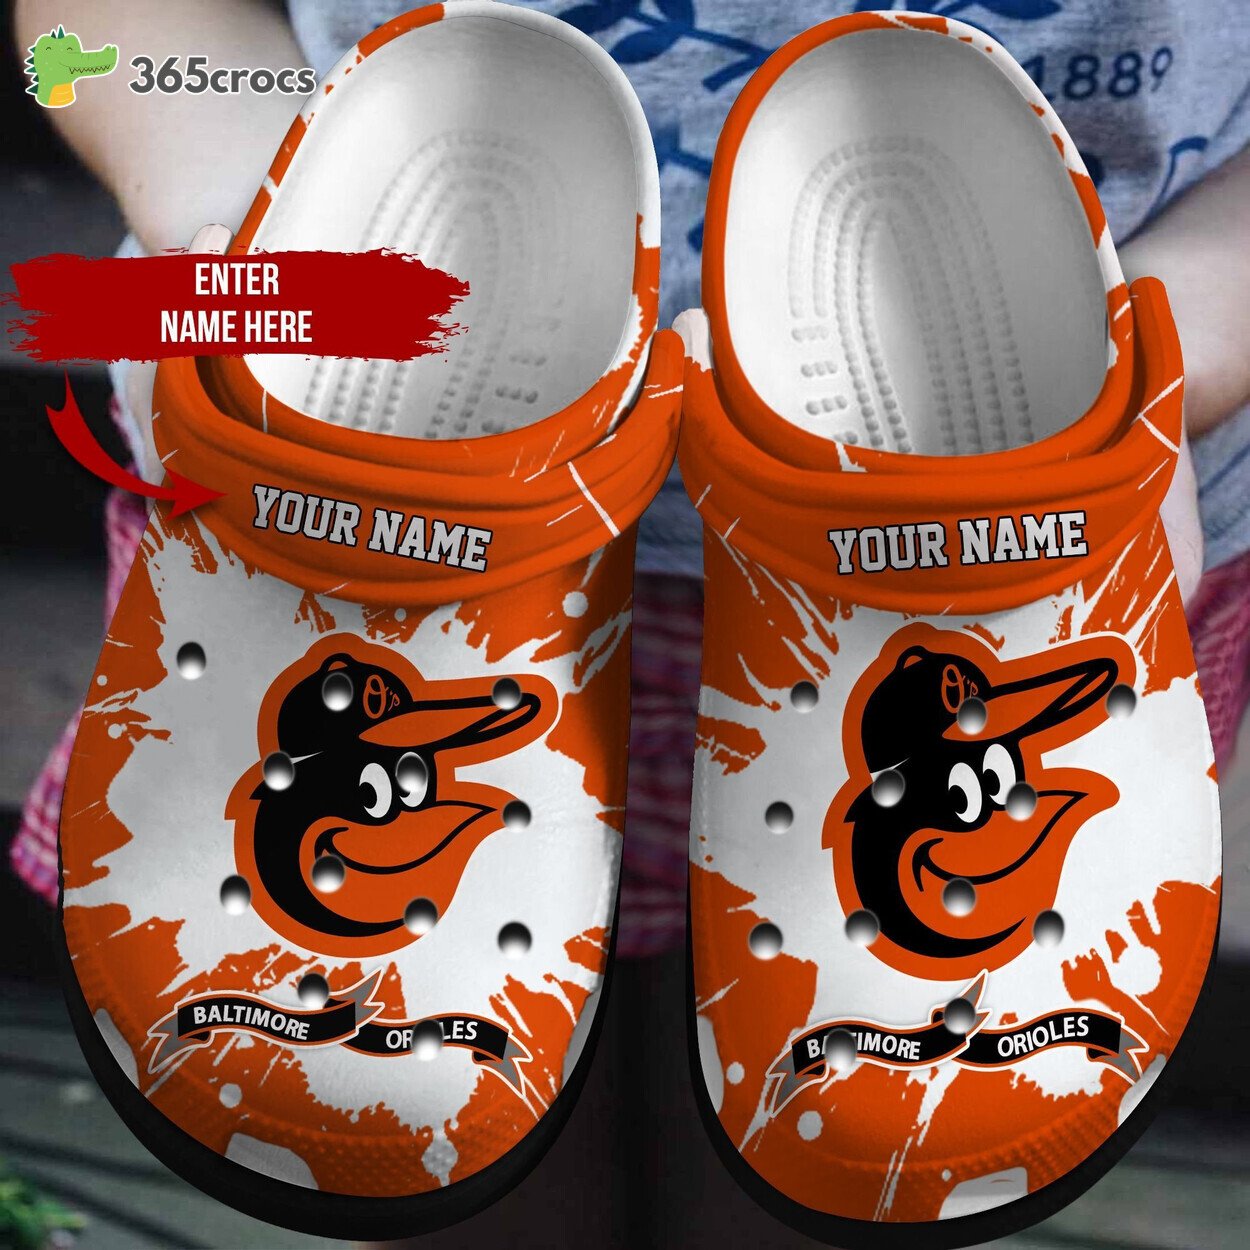 Baltimore Orioles Personalized Comfortable Clog Shoes Baseball Team Design